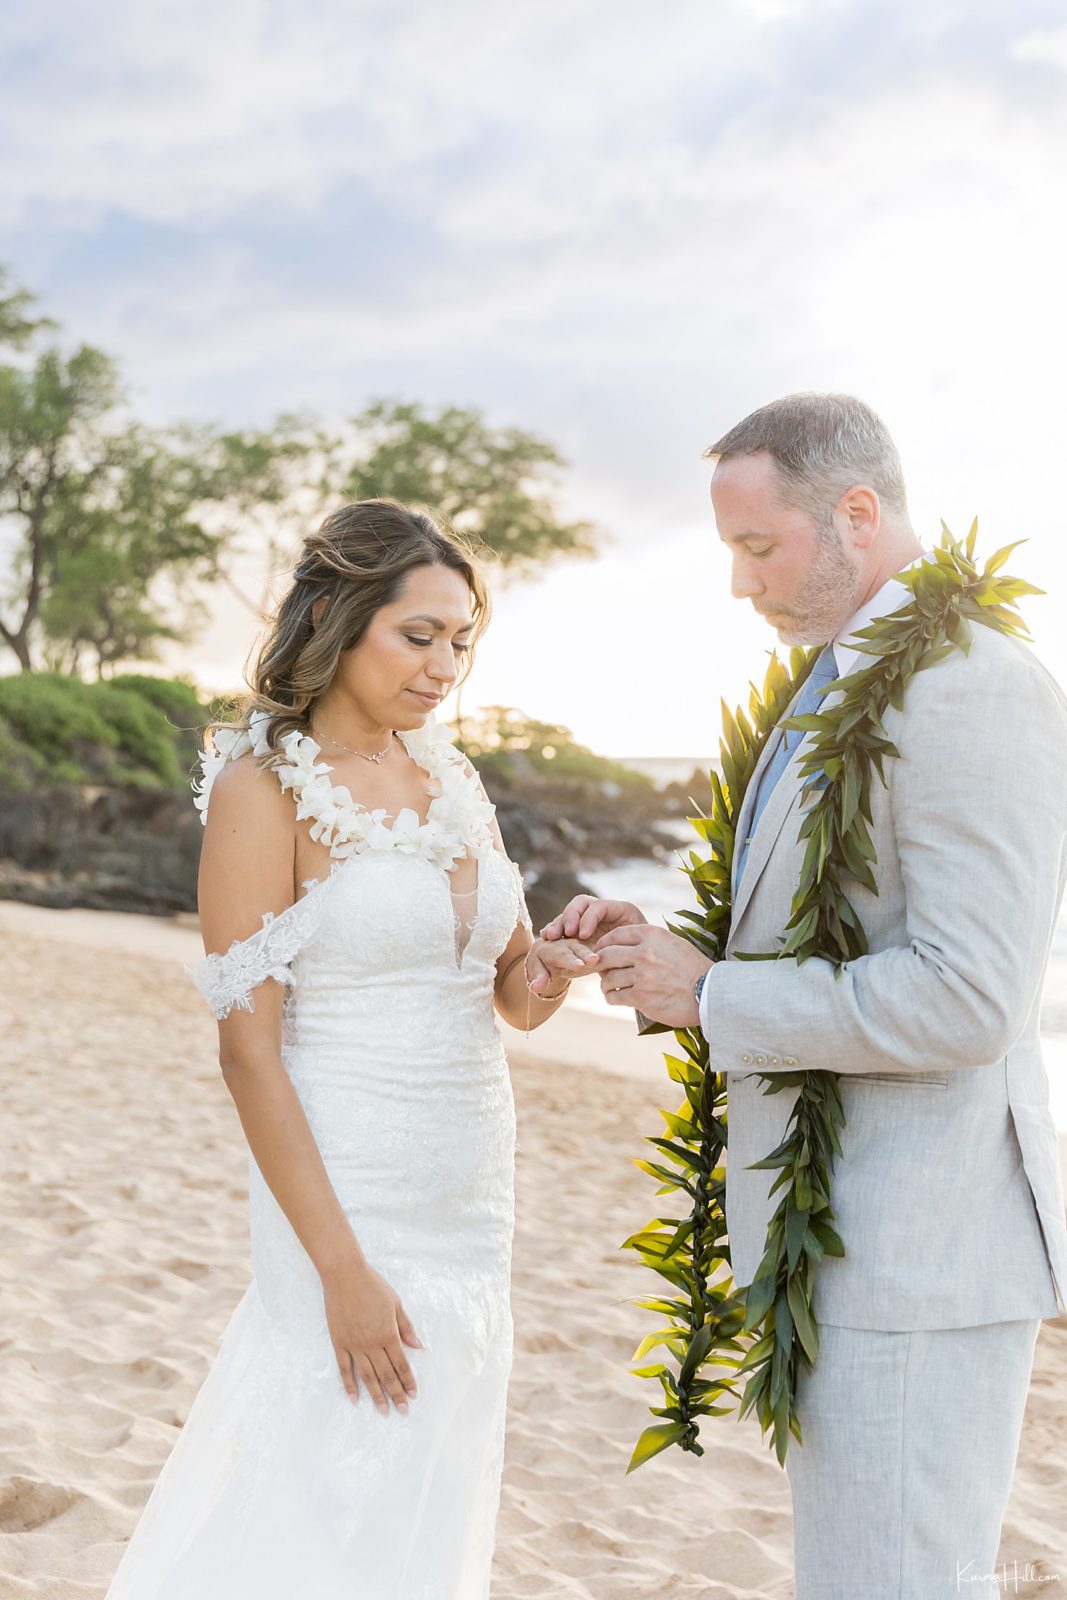 There Was You - Abigail & David's Maui Elopement